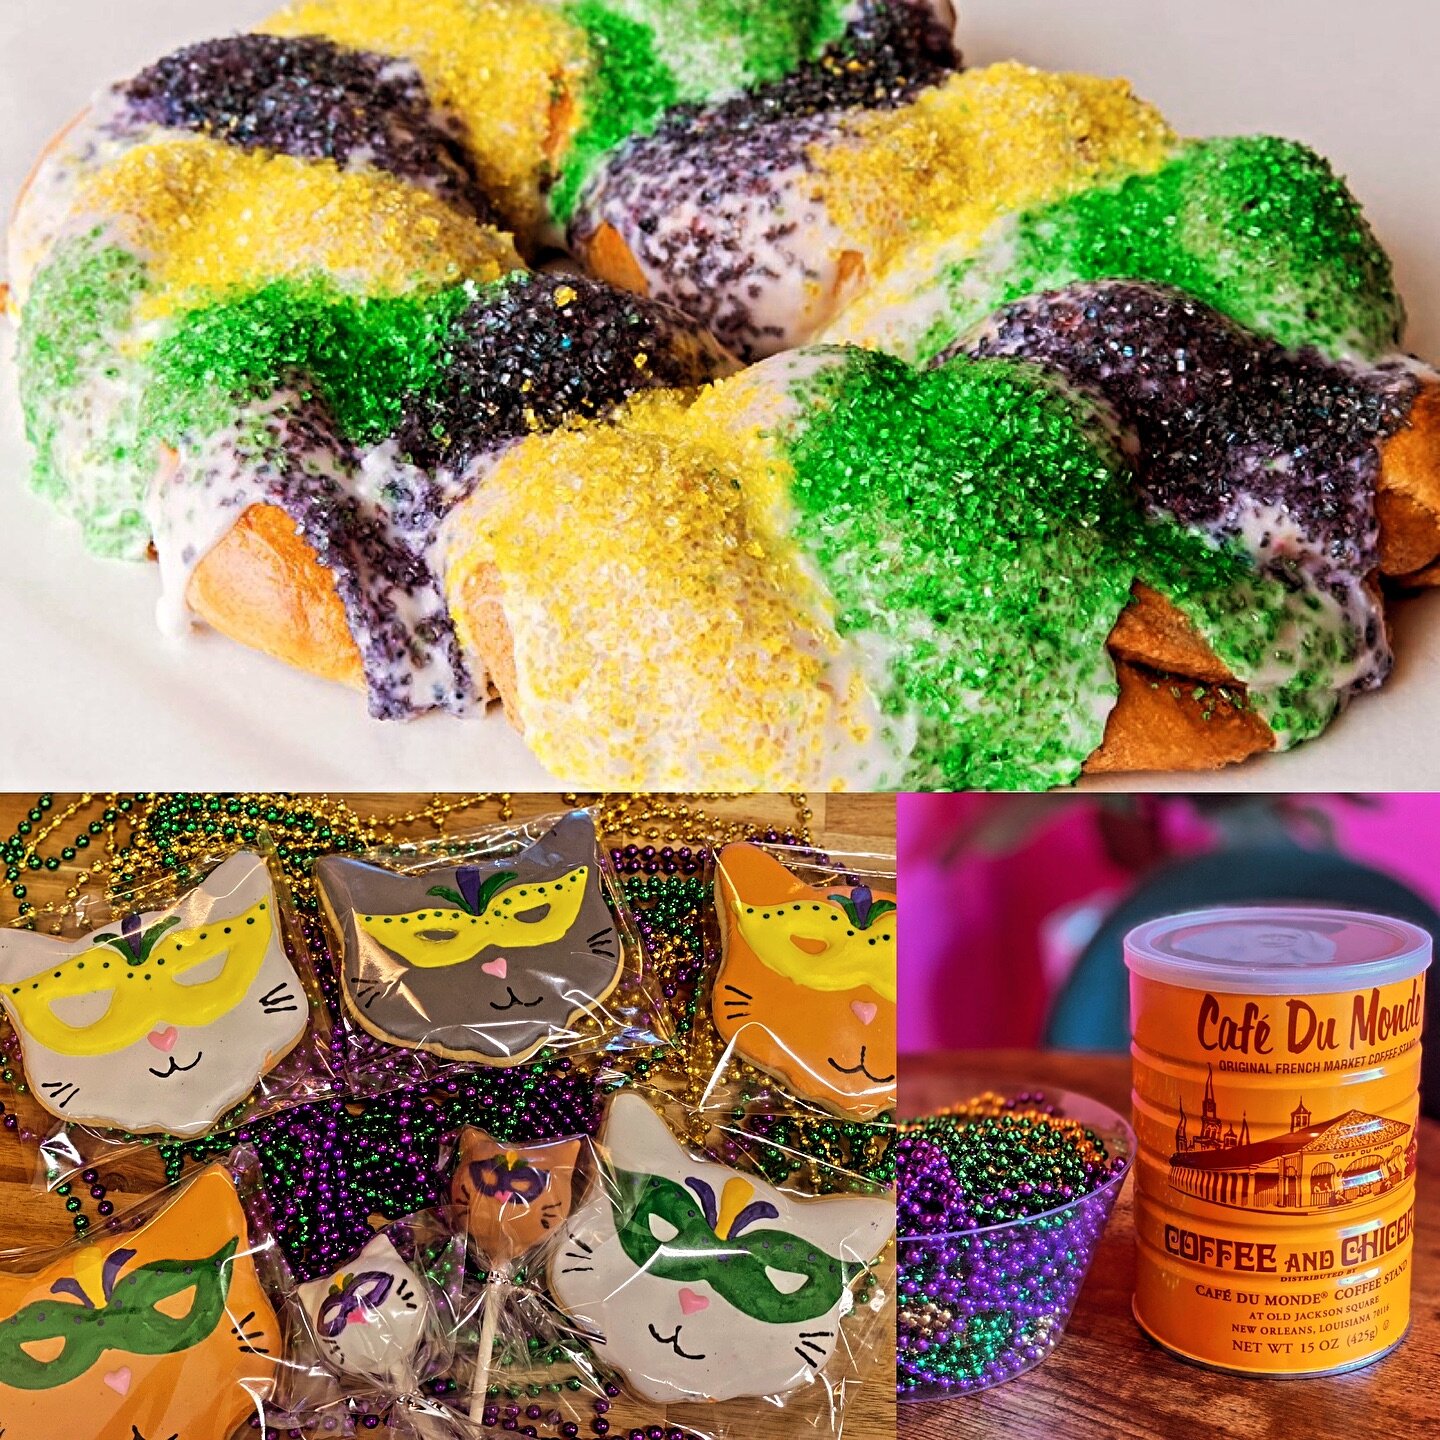 Come celebrate Fat Cat Tuesday with us Tues Feb 13th from 10am-7pm.

FREE slice of King Cake with lounge hour purchase, available all day.

Serving Cafe Au Lait roasted by Cafe Du Monde, for purchase

Mardis Gras themed cookies &amp; cake pops availa